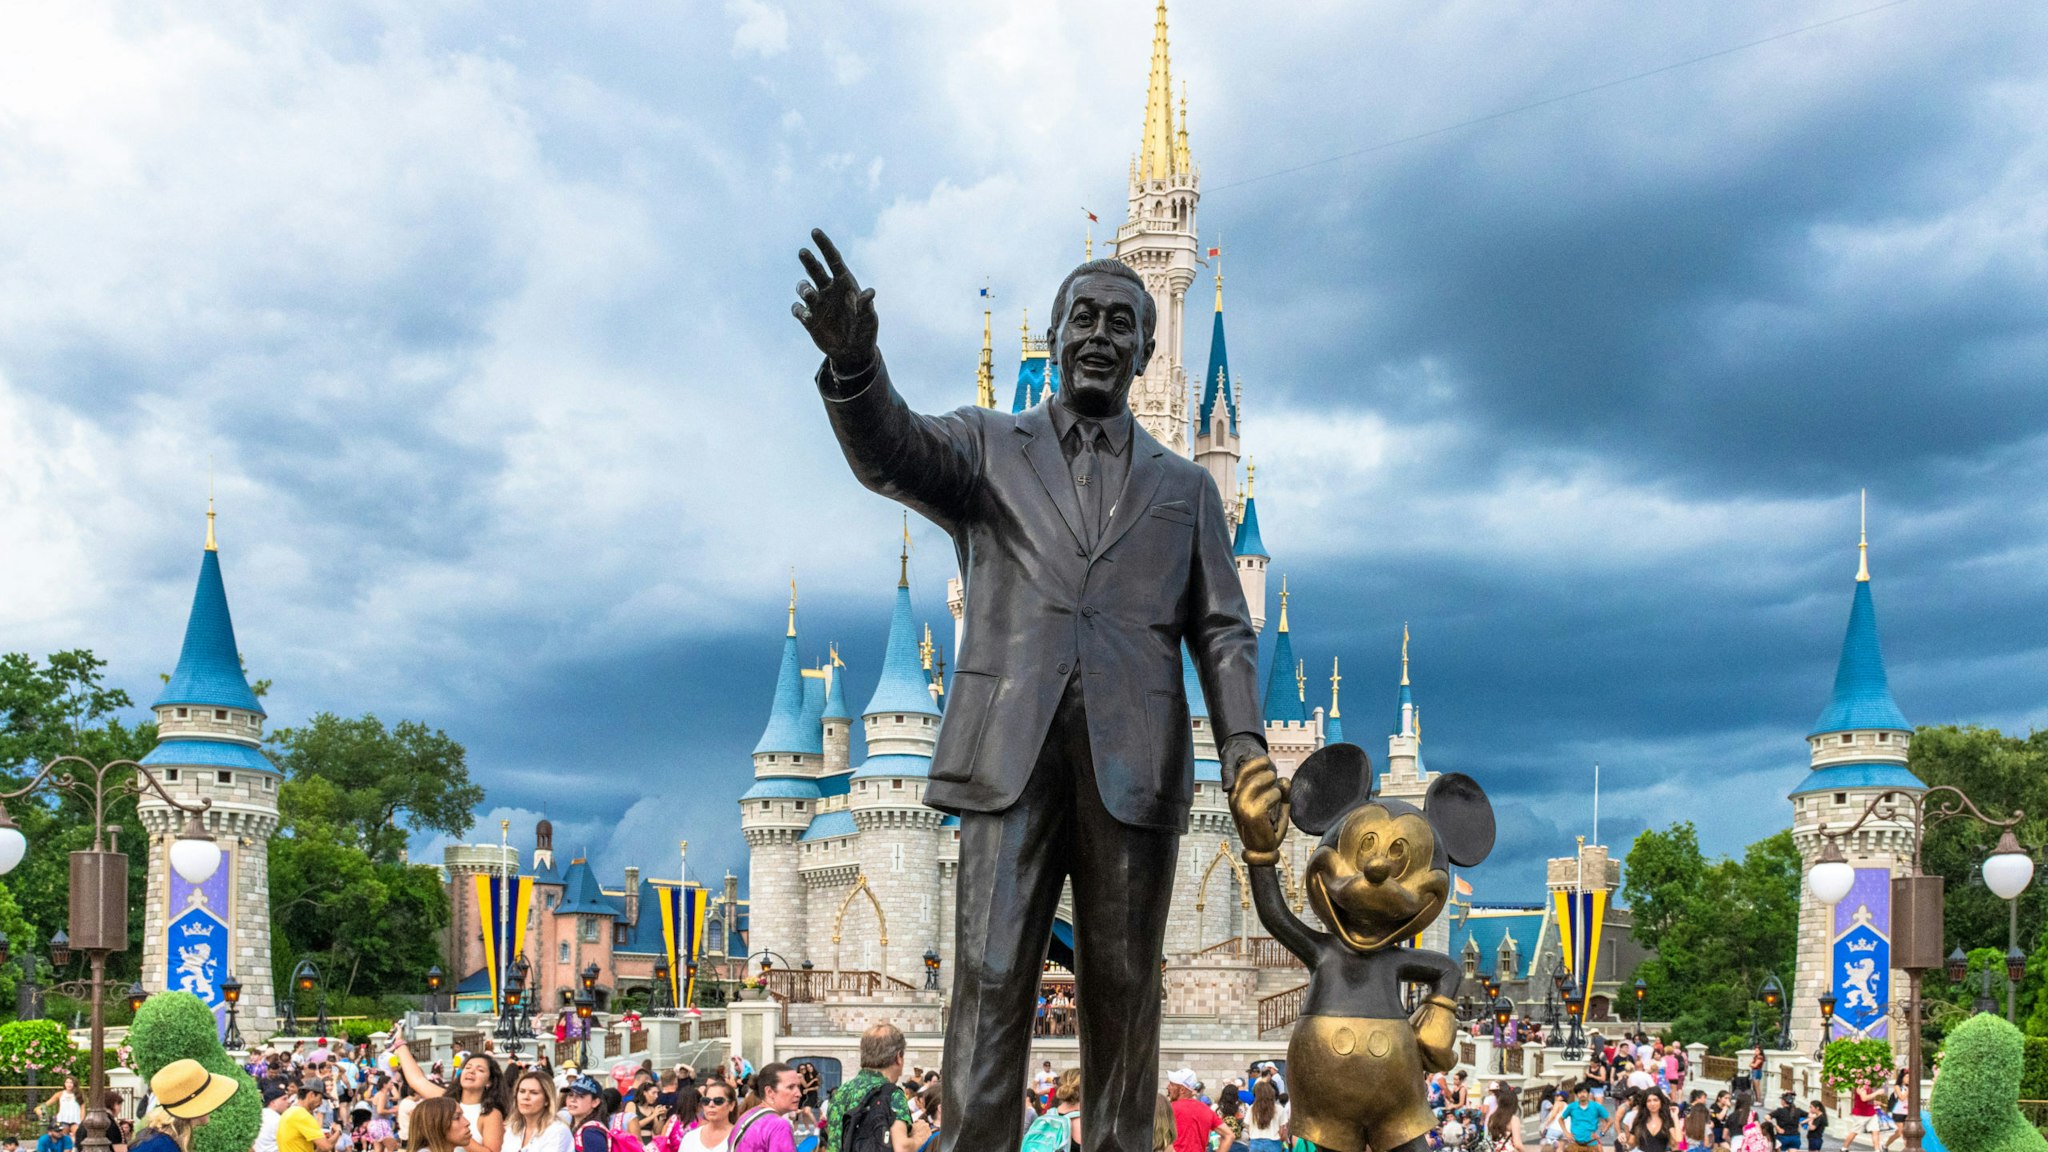 ORLANDO, FLORIDA, UNITED STATES - 2019/07/17: Walt Disney and Mickey Mouse statue inside of the Magic Kingdom theme park . The Cinderella castle can be seen in the background. (Photo by Roberto Machado Noa/LightRocket via Getty Images)